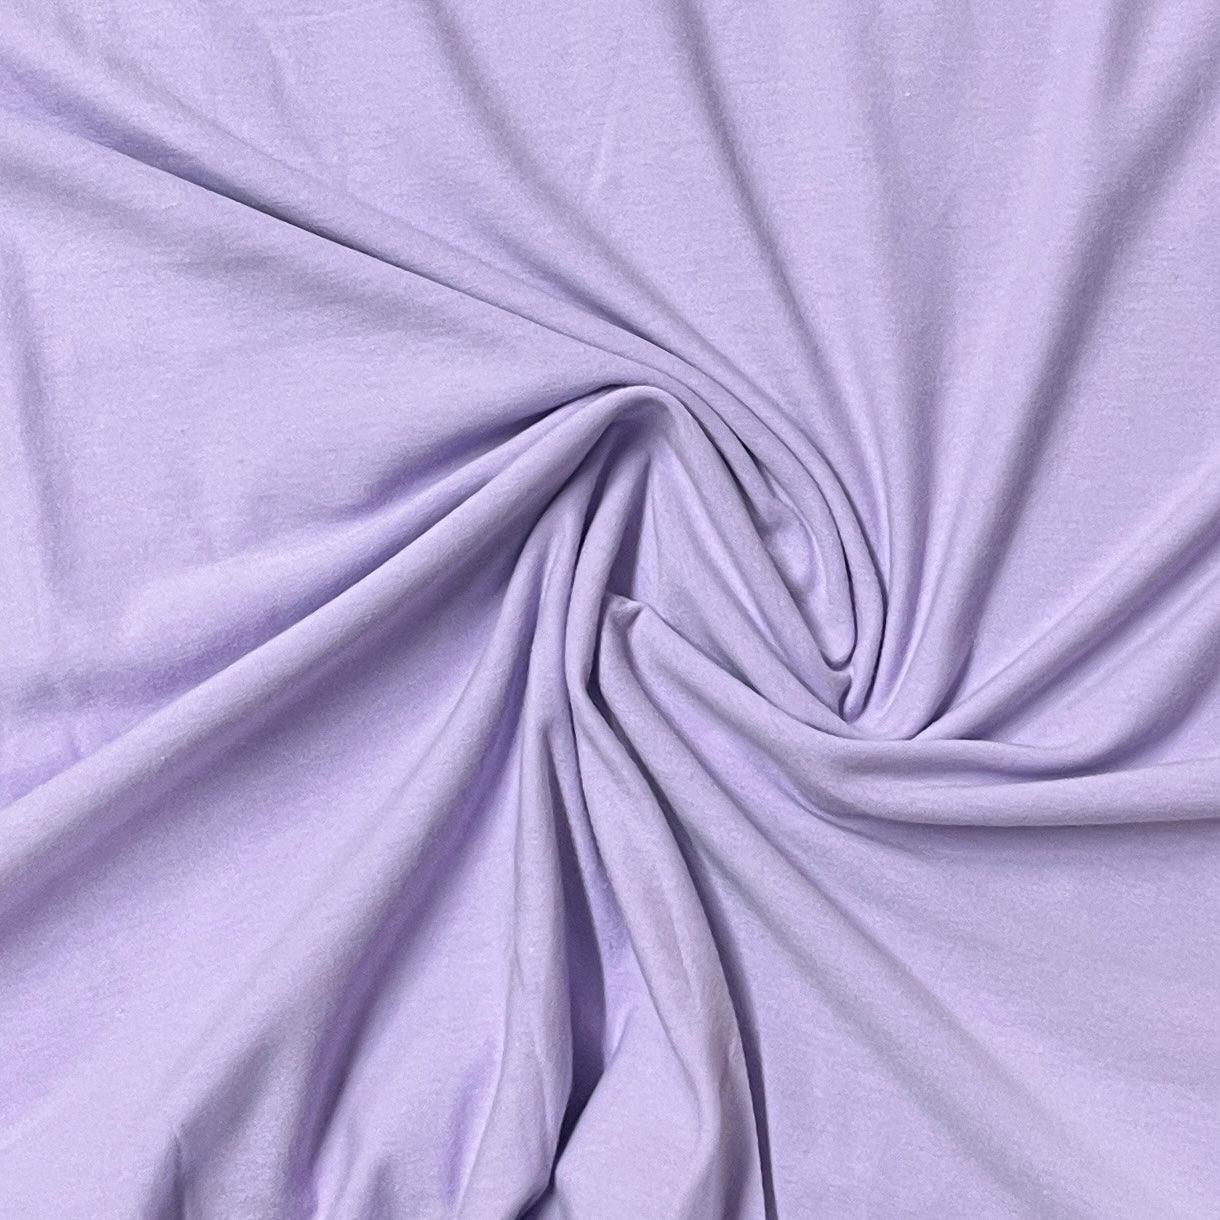 Free SHIIPPING!!! Medium Weight Rayon Stretch Spandex Jersey Knit Fabric  (5Yards, Lt. Lavender)